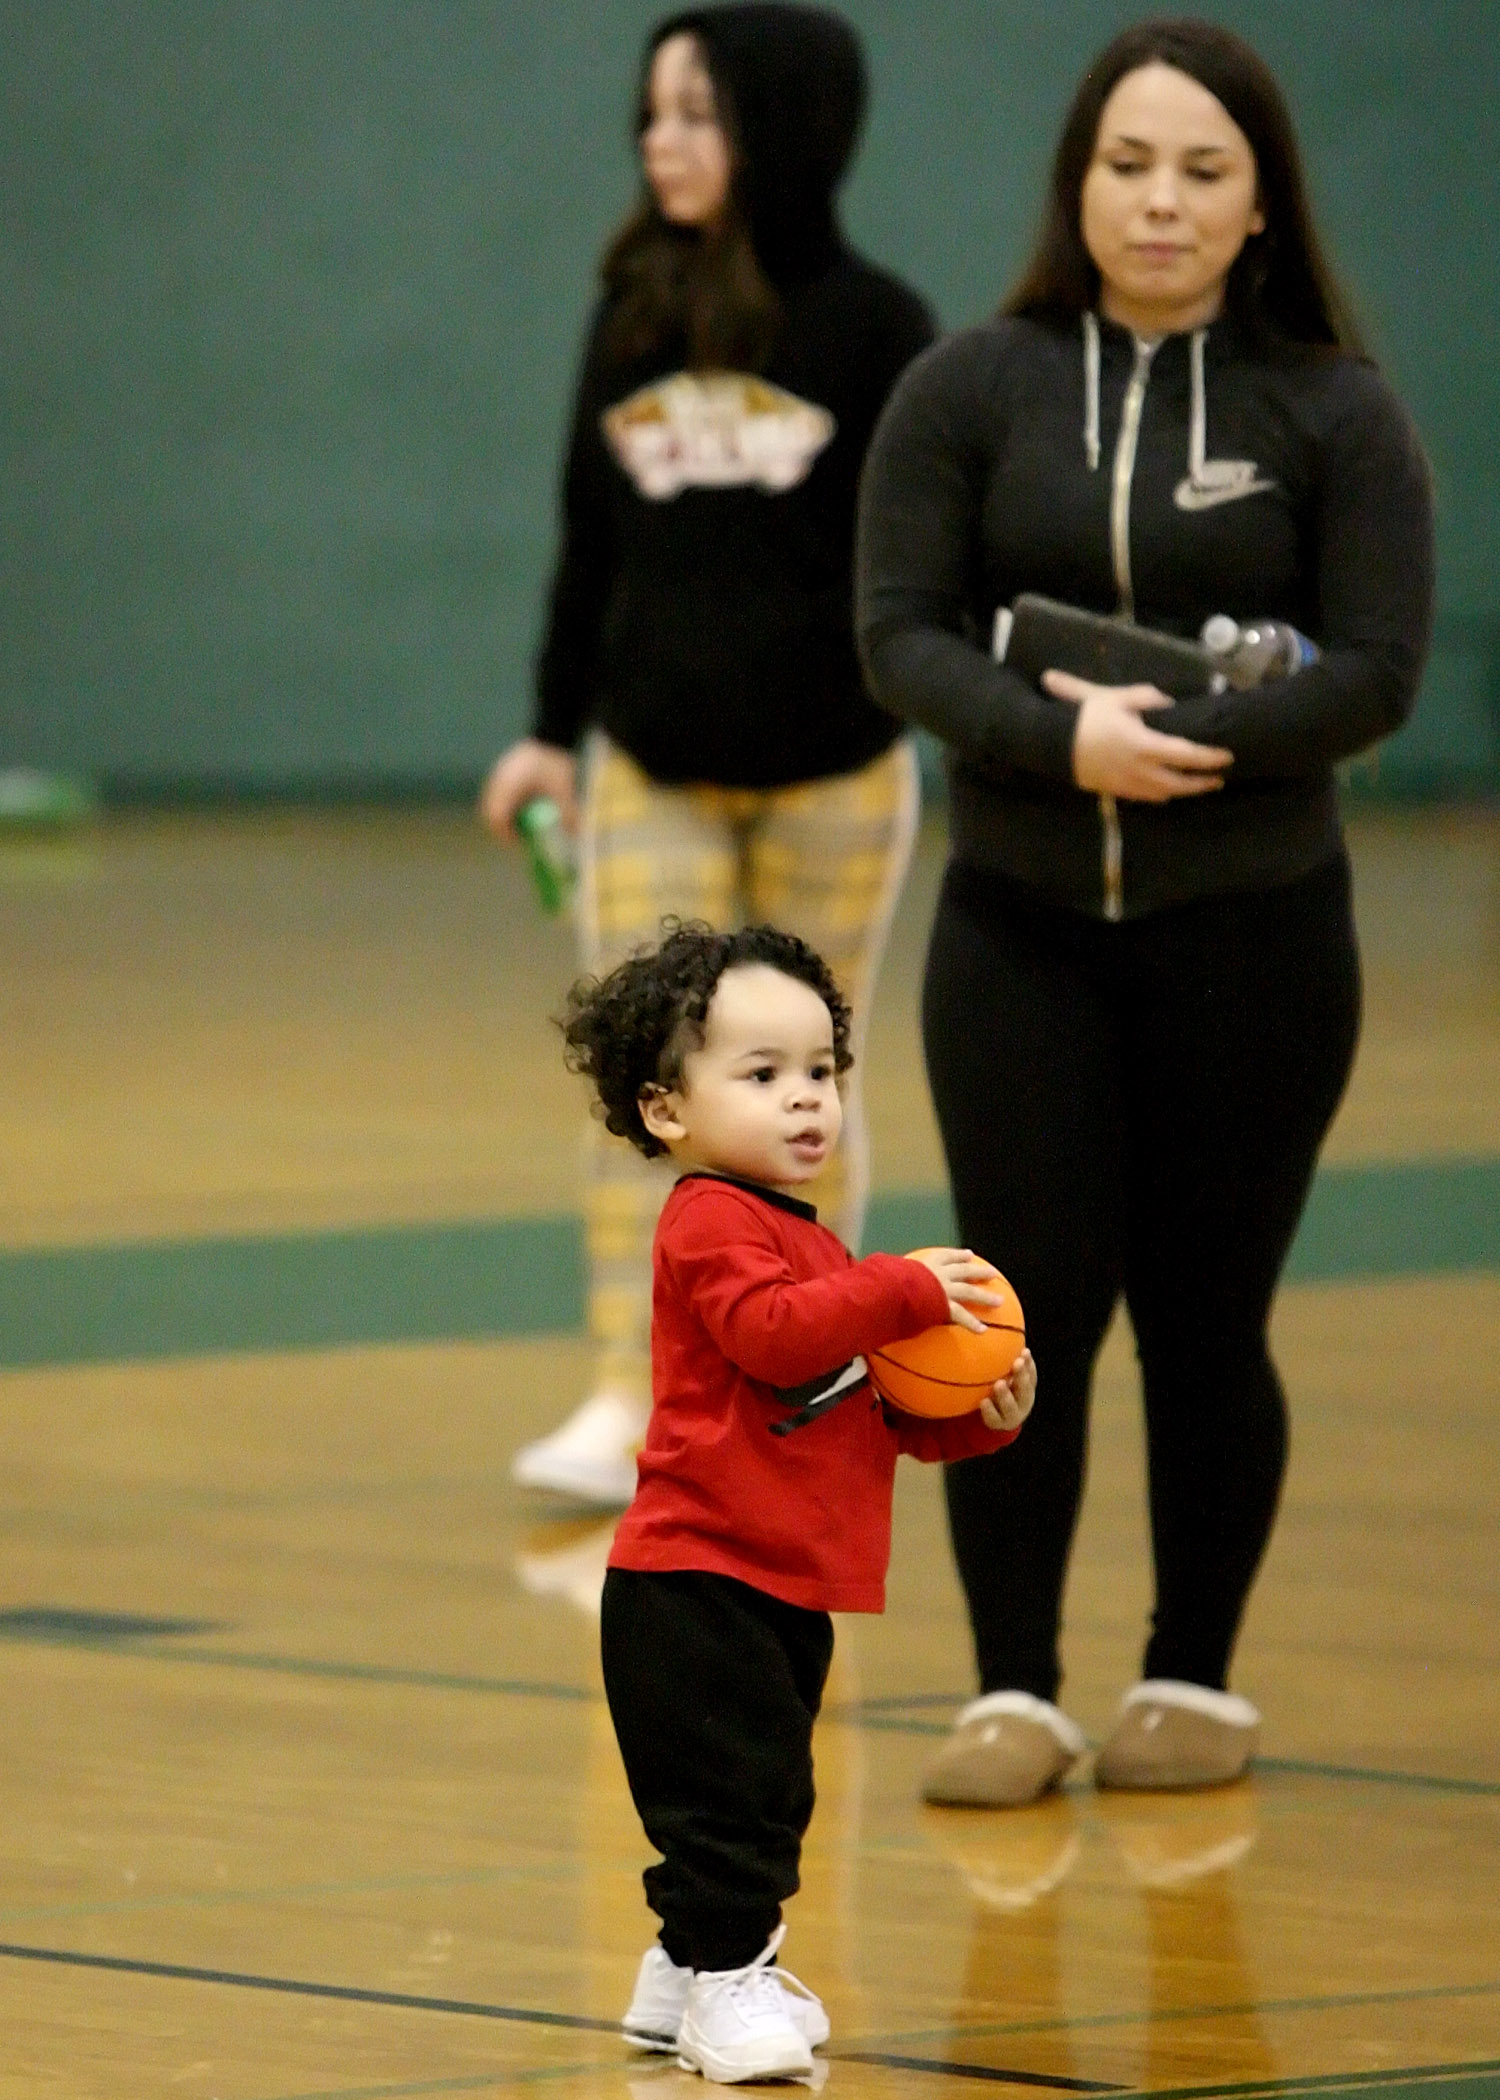 At half time young Maurice enjoyed his time on the court with his basketball.